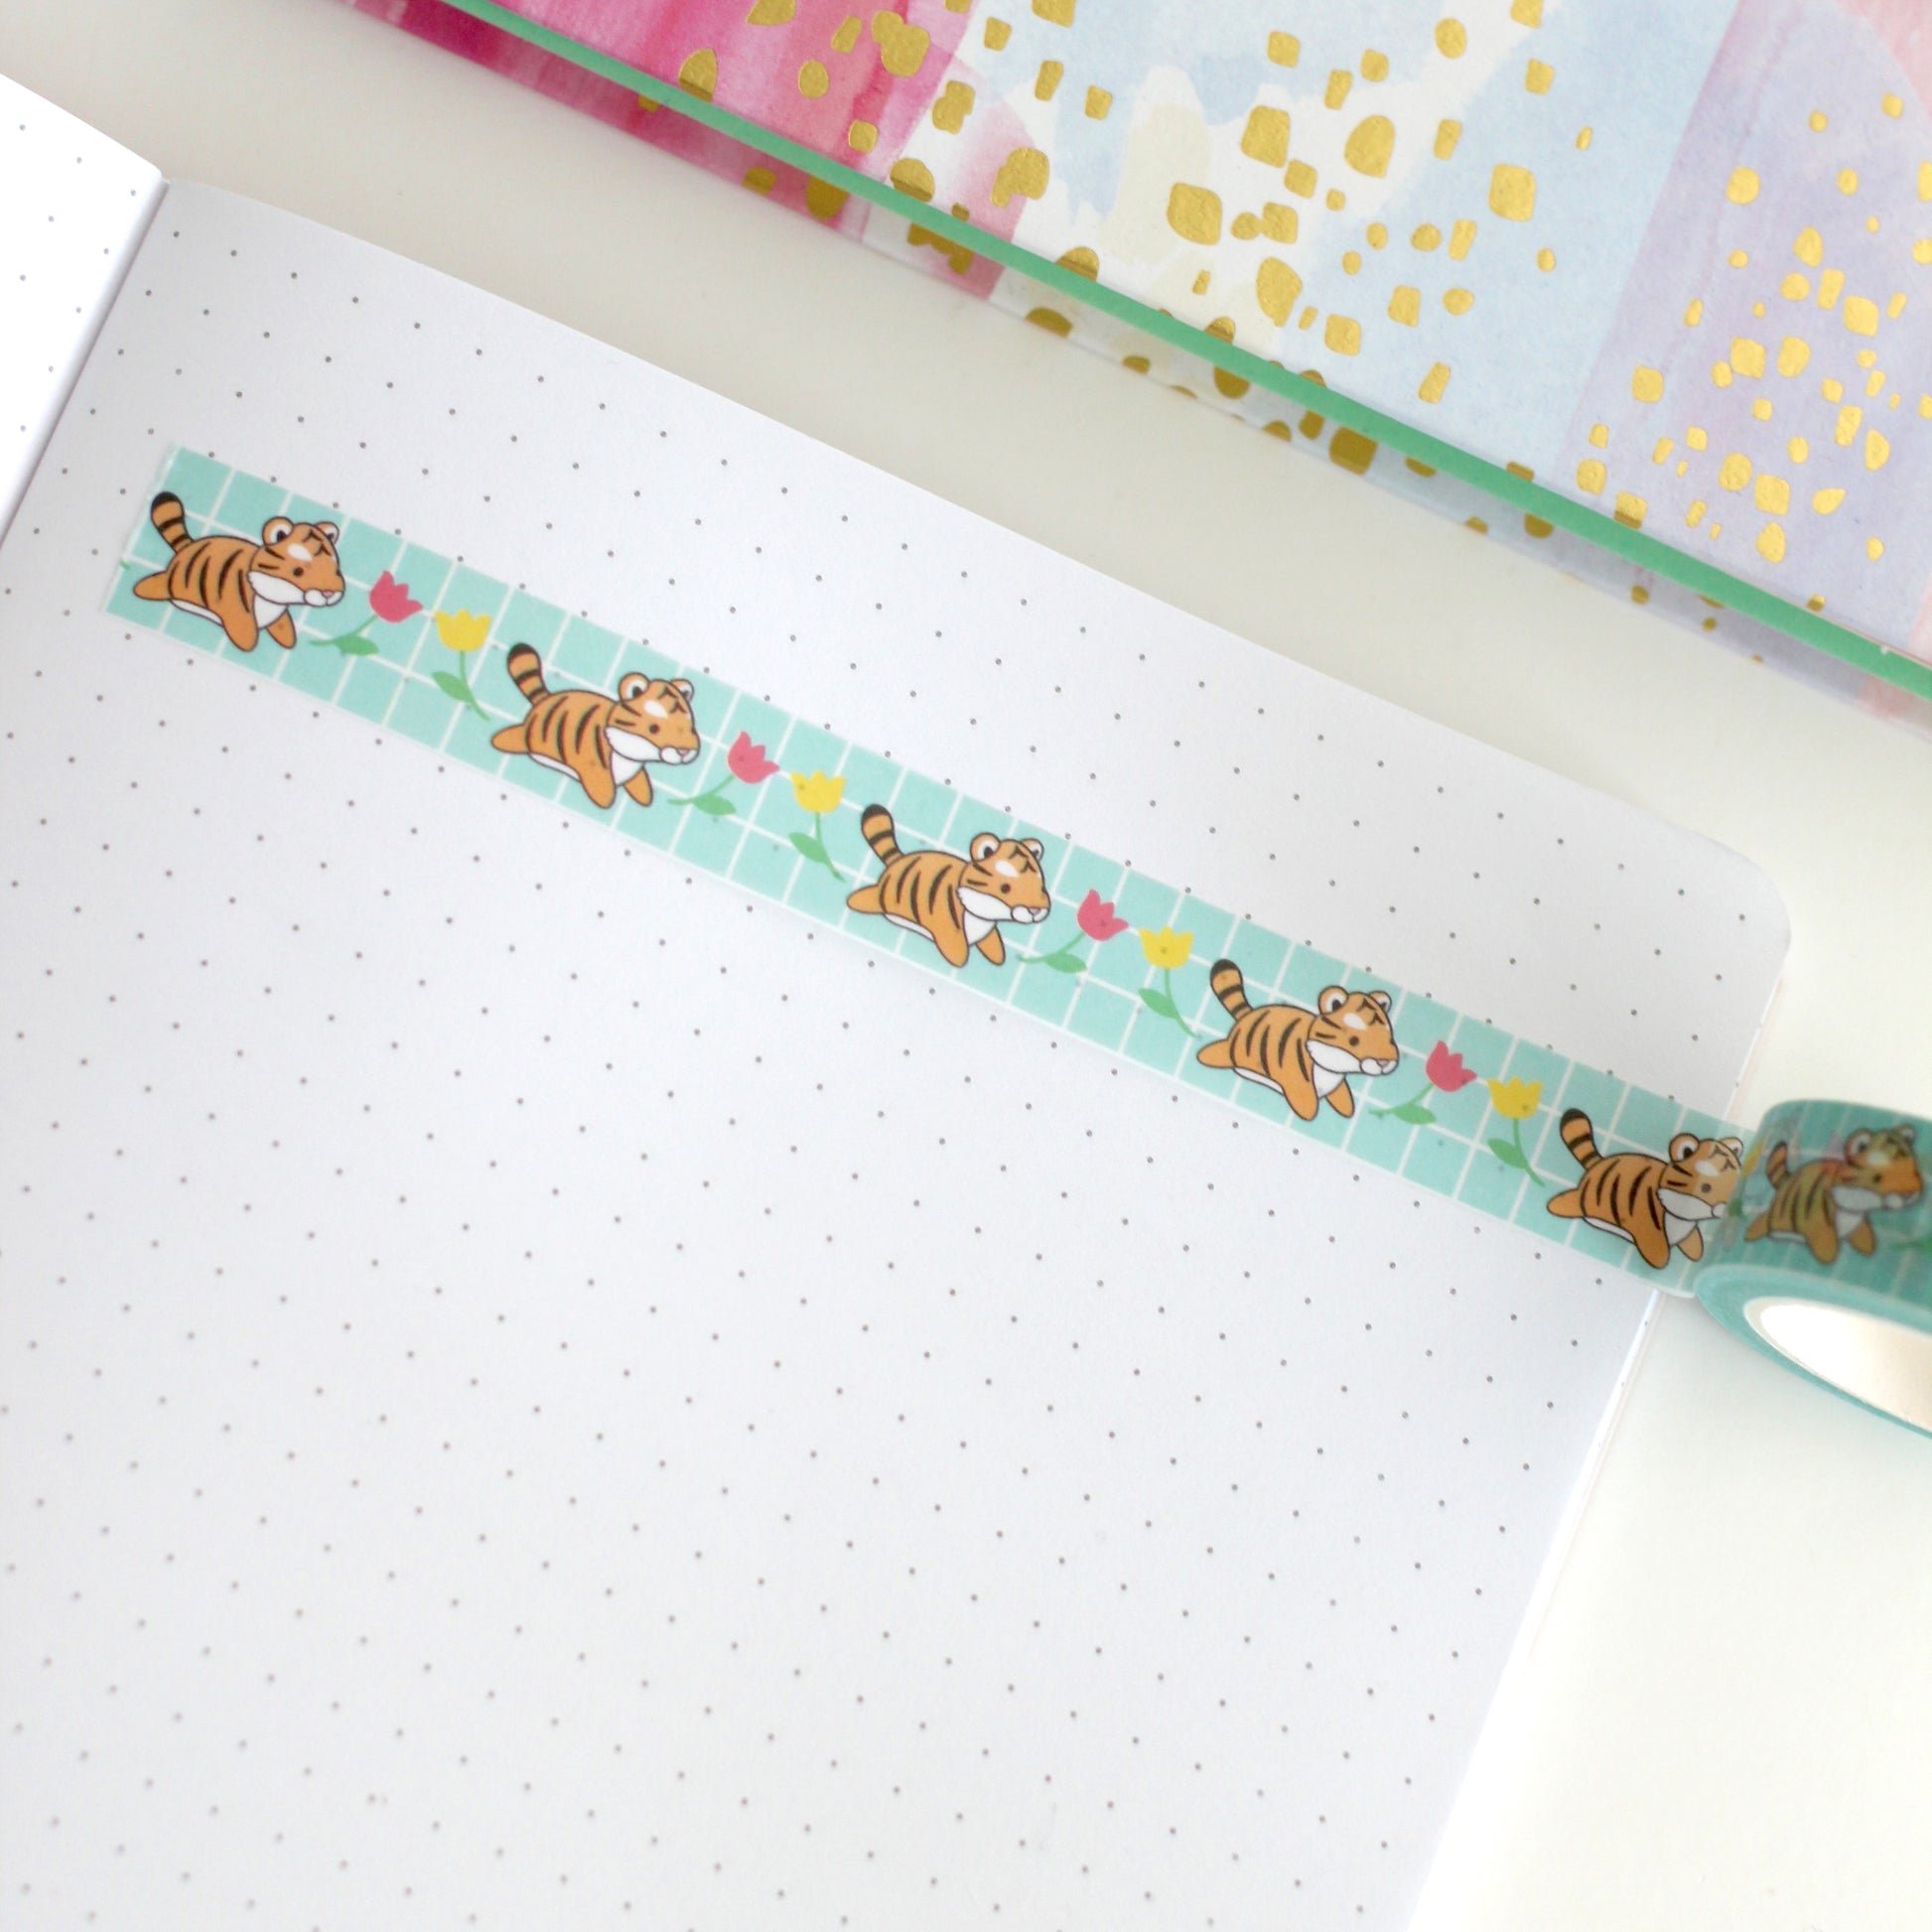 Leaping Tiger Washi Tape - Turquoise Grid Washi - Tiger Stationery by Wild Whimsy Woolies